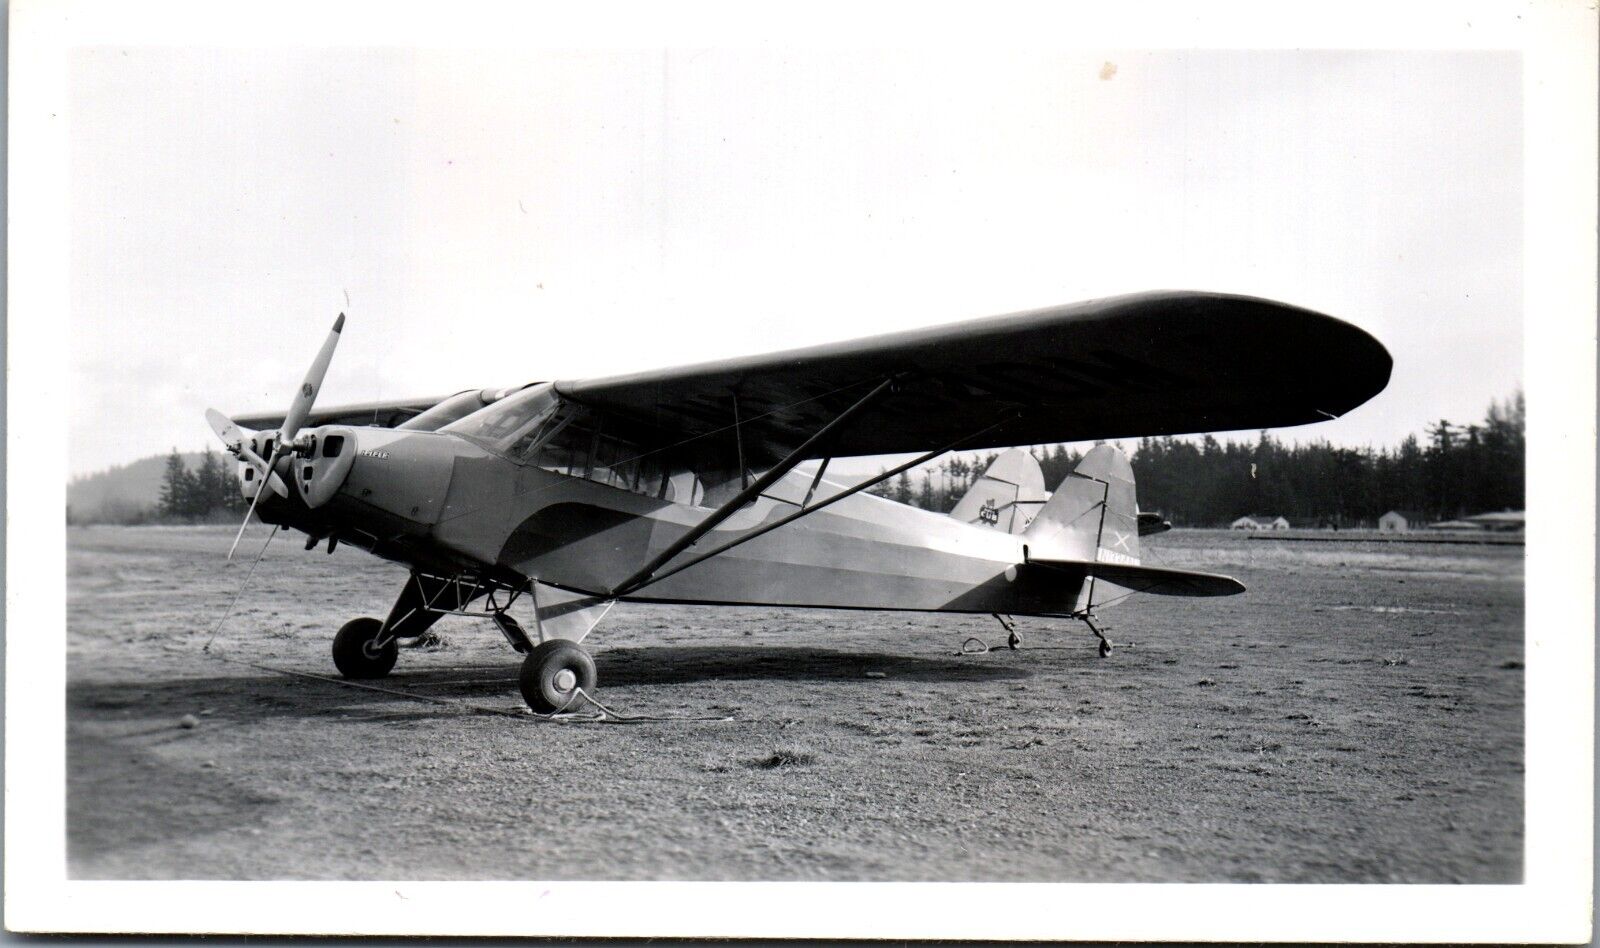 Wagner-Piper PA-11 Cub Special Plane Photo (3 x 5)